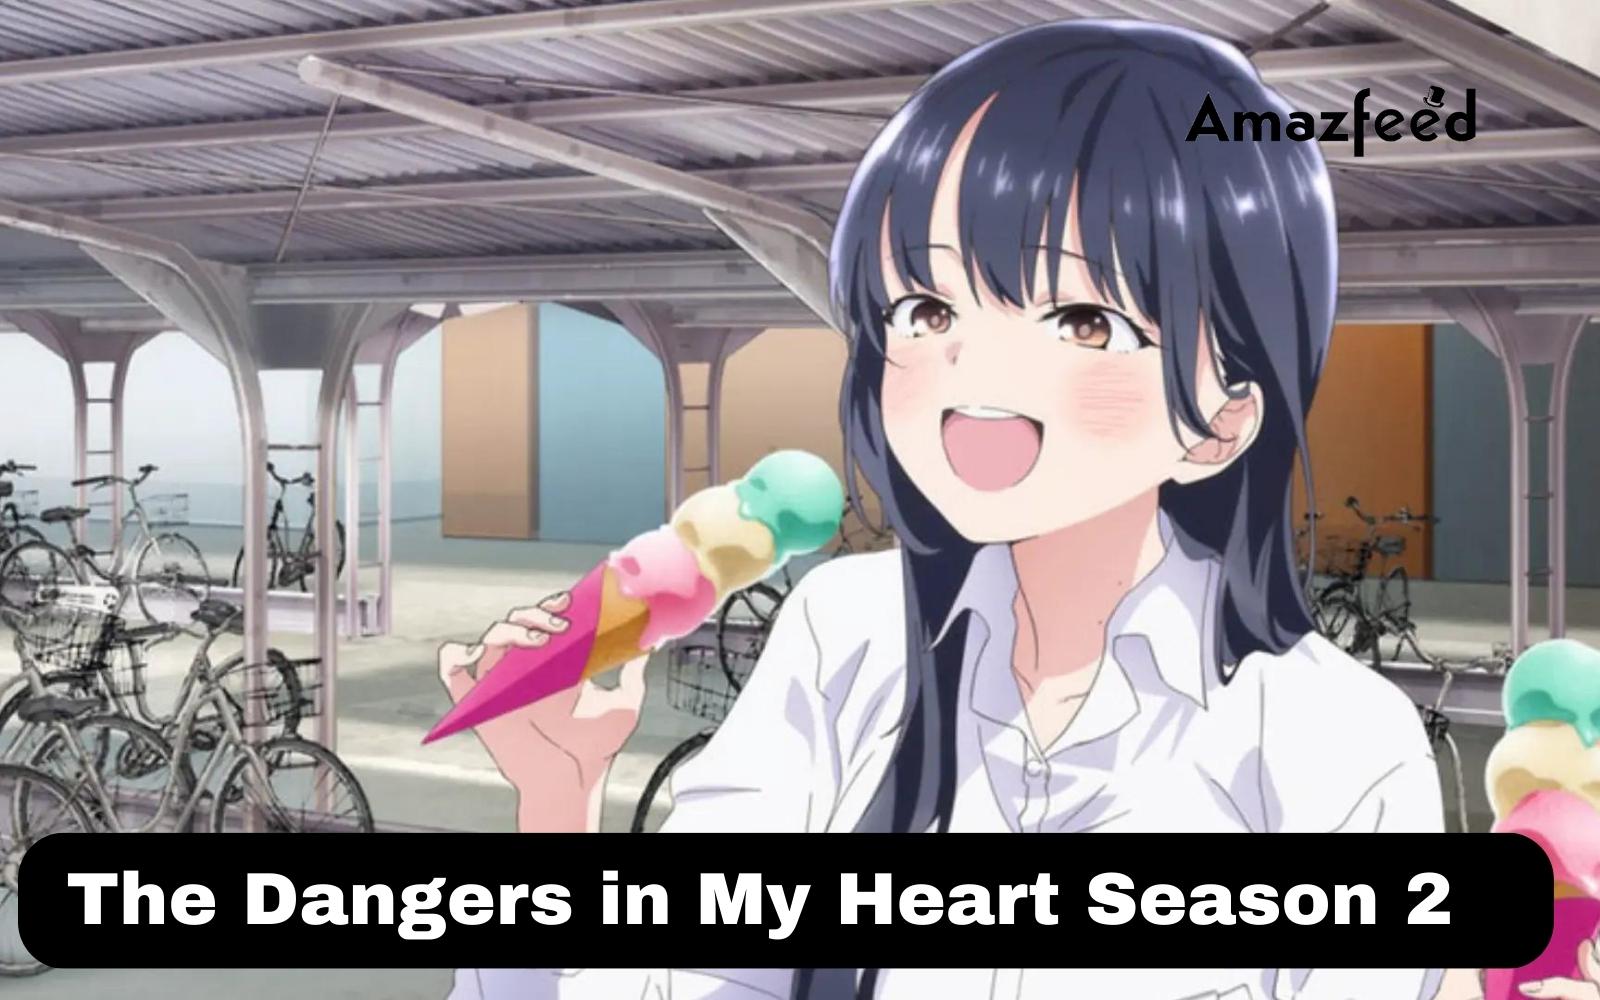 The Dangers in My Heart season 2 reportedly confirmed ahead of the finale